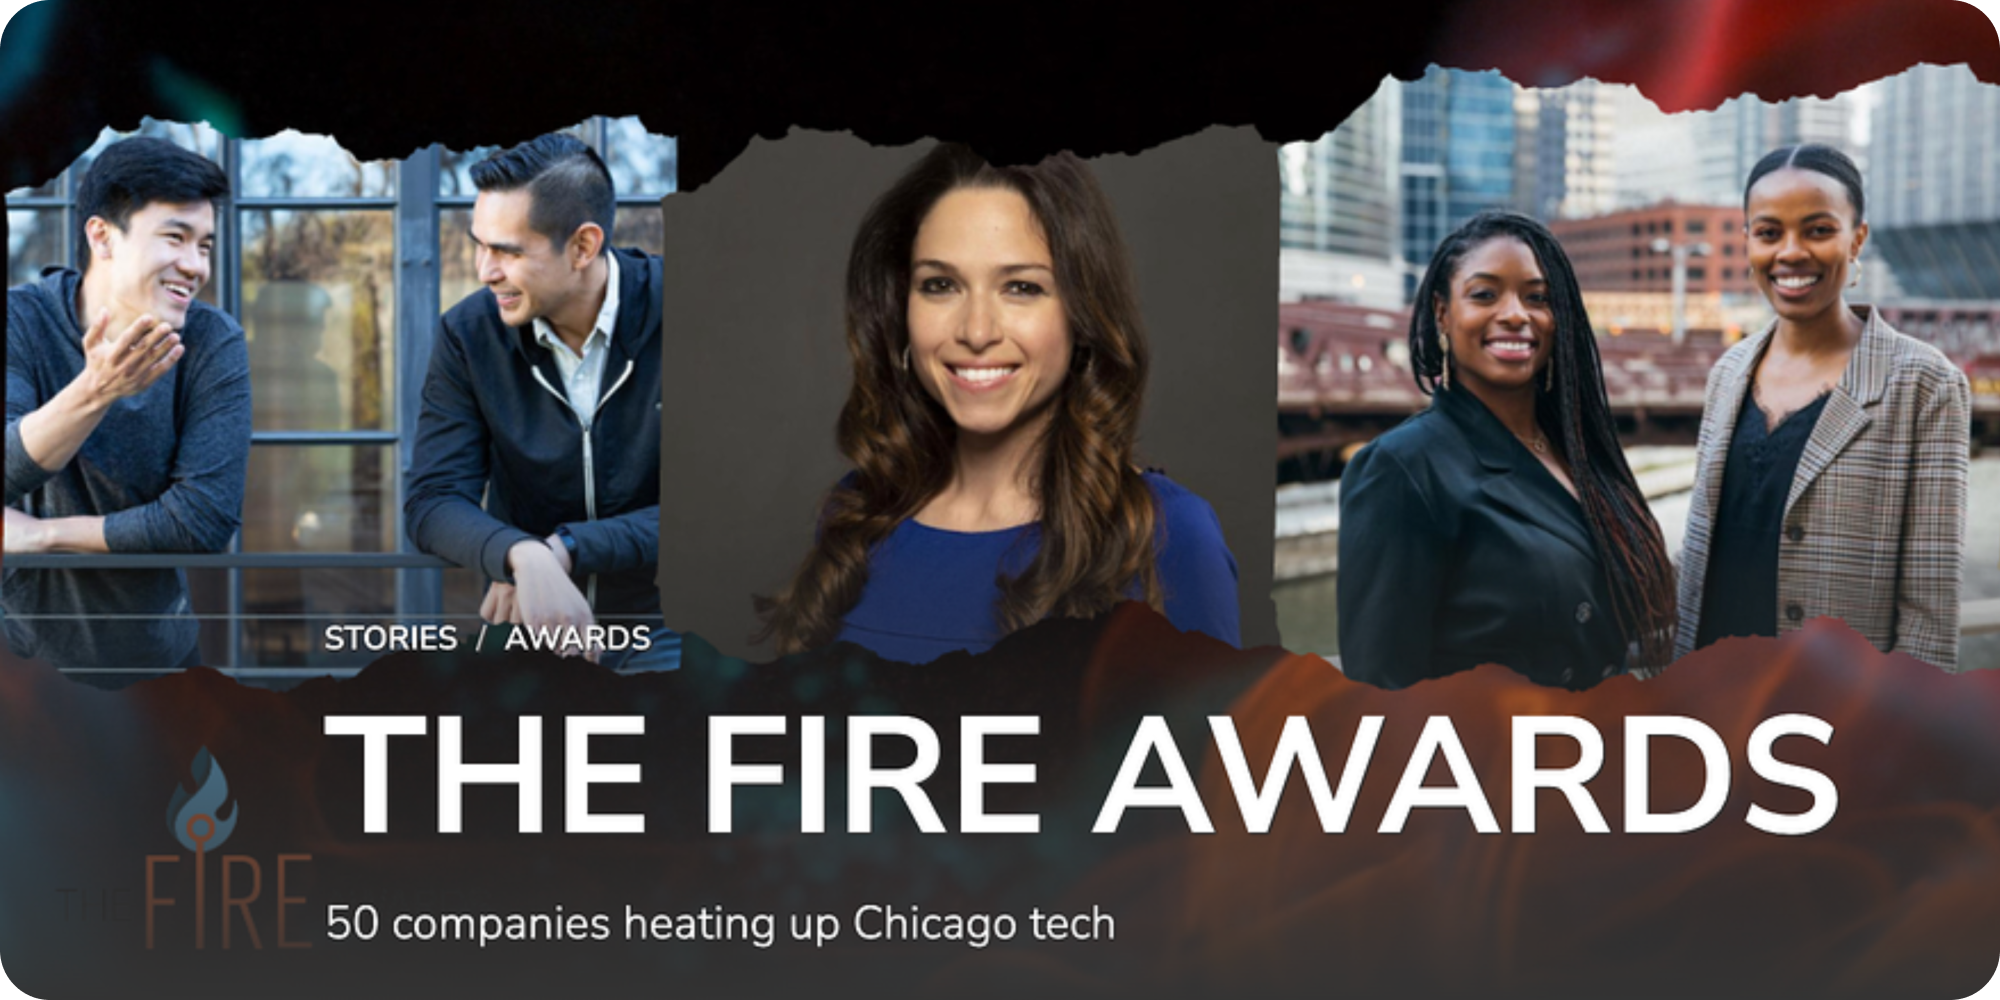 Crafty wins ChicagoInno's 50 of Fire Award 2022